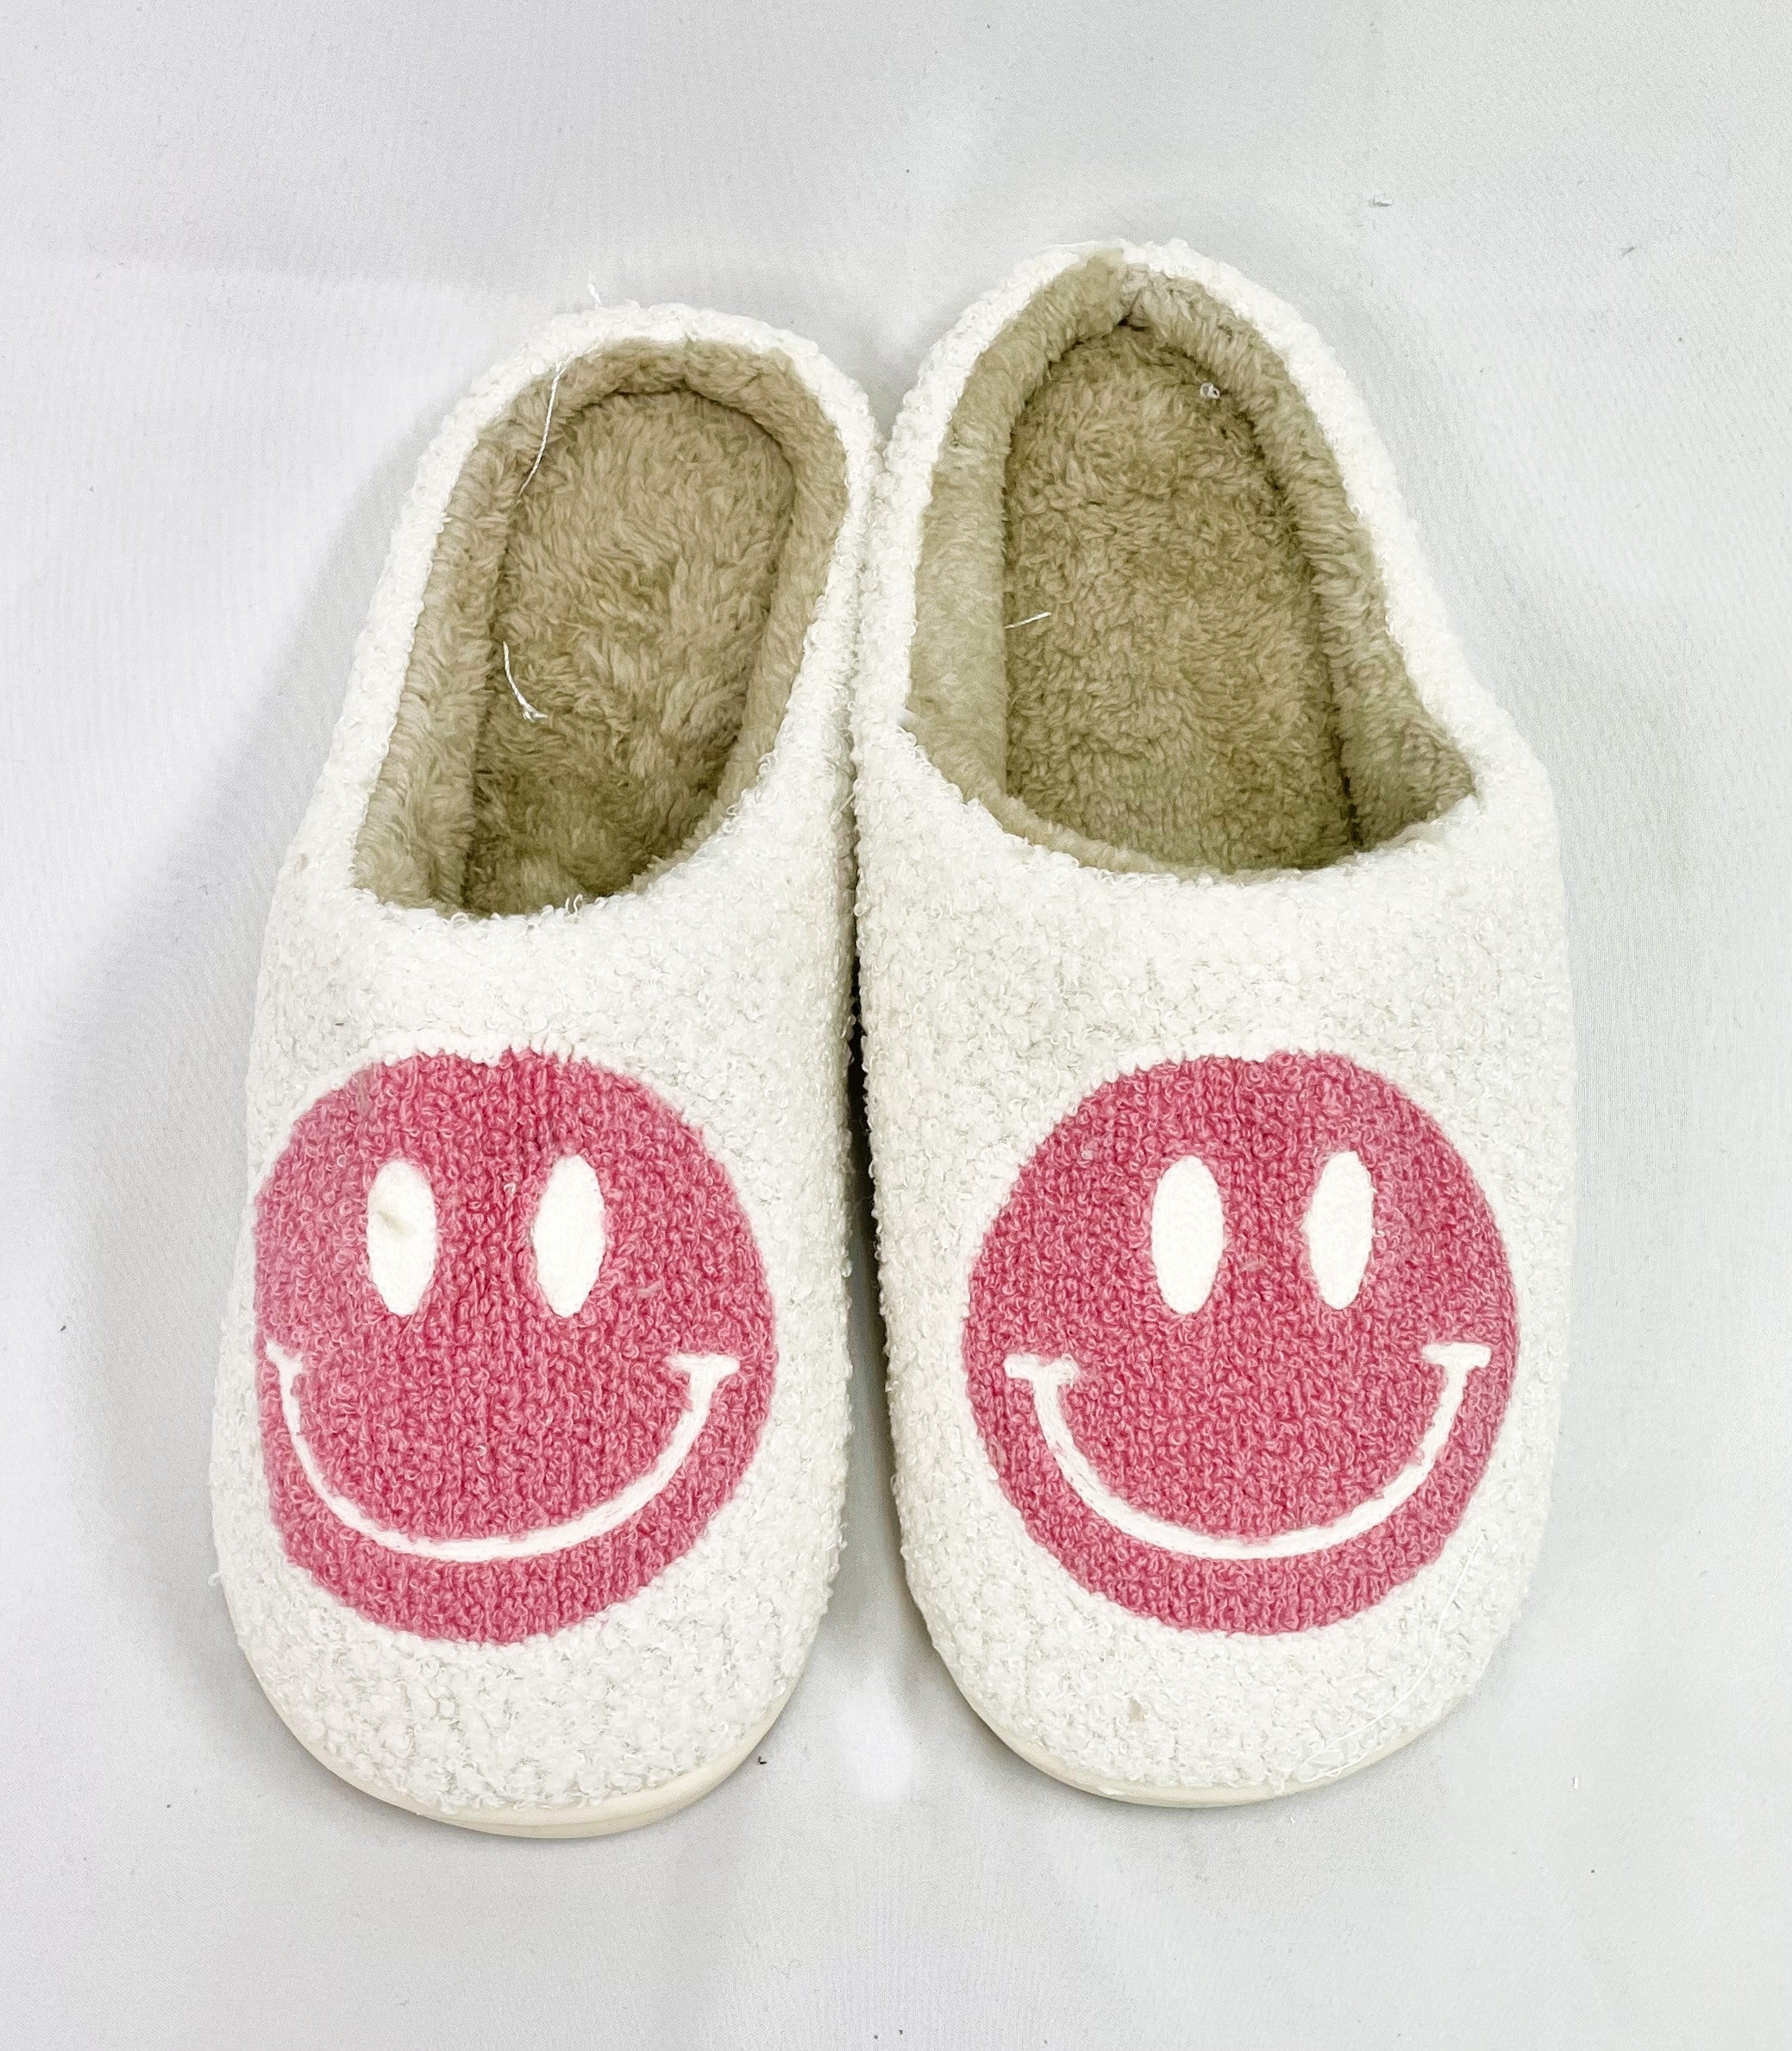 Smiley Cozy Slippers - Pink